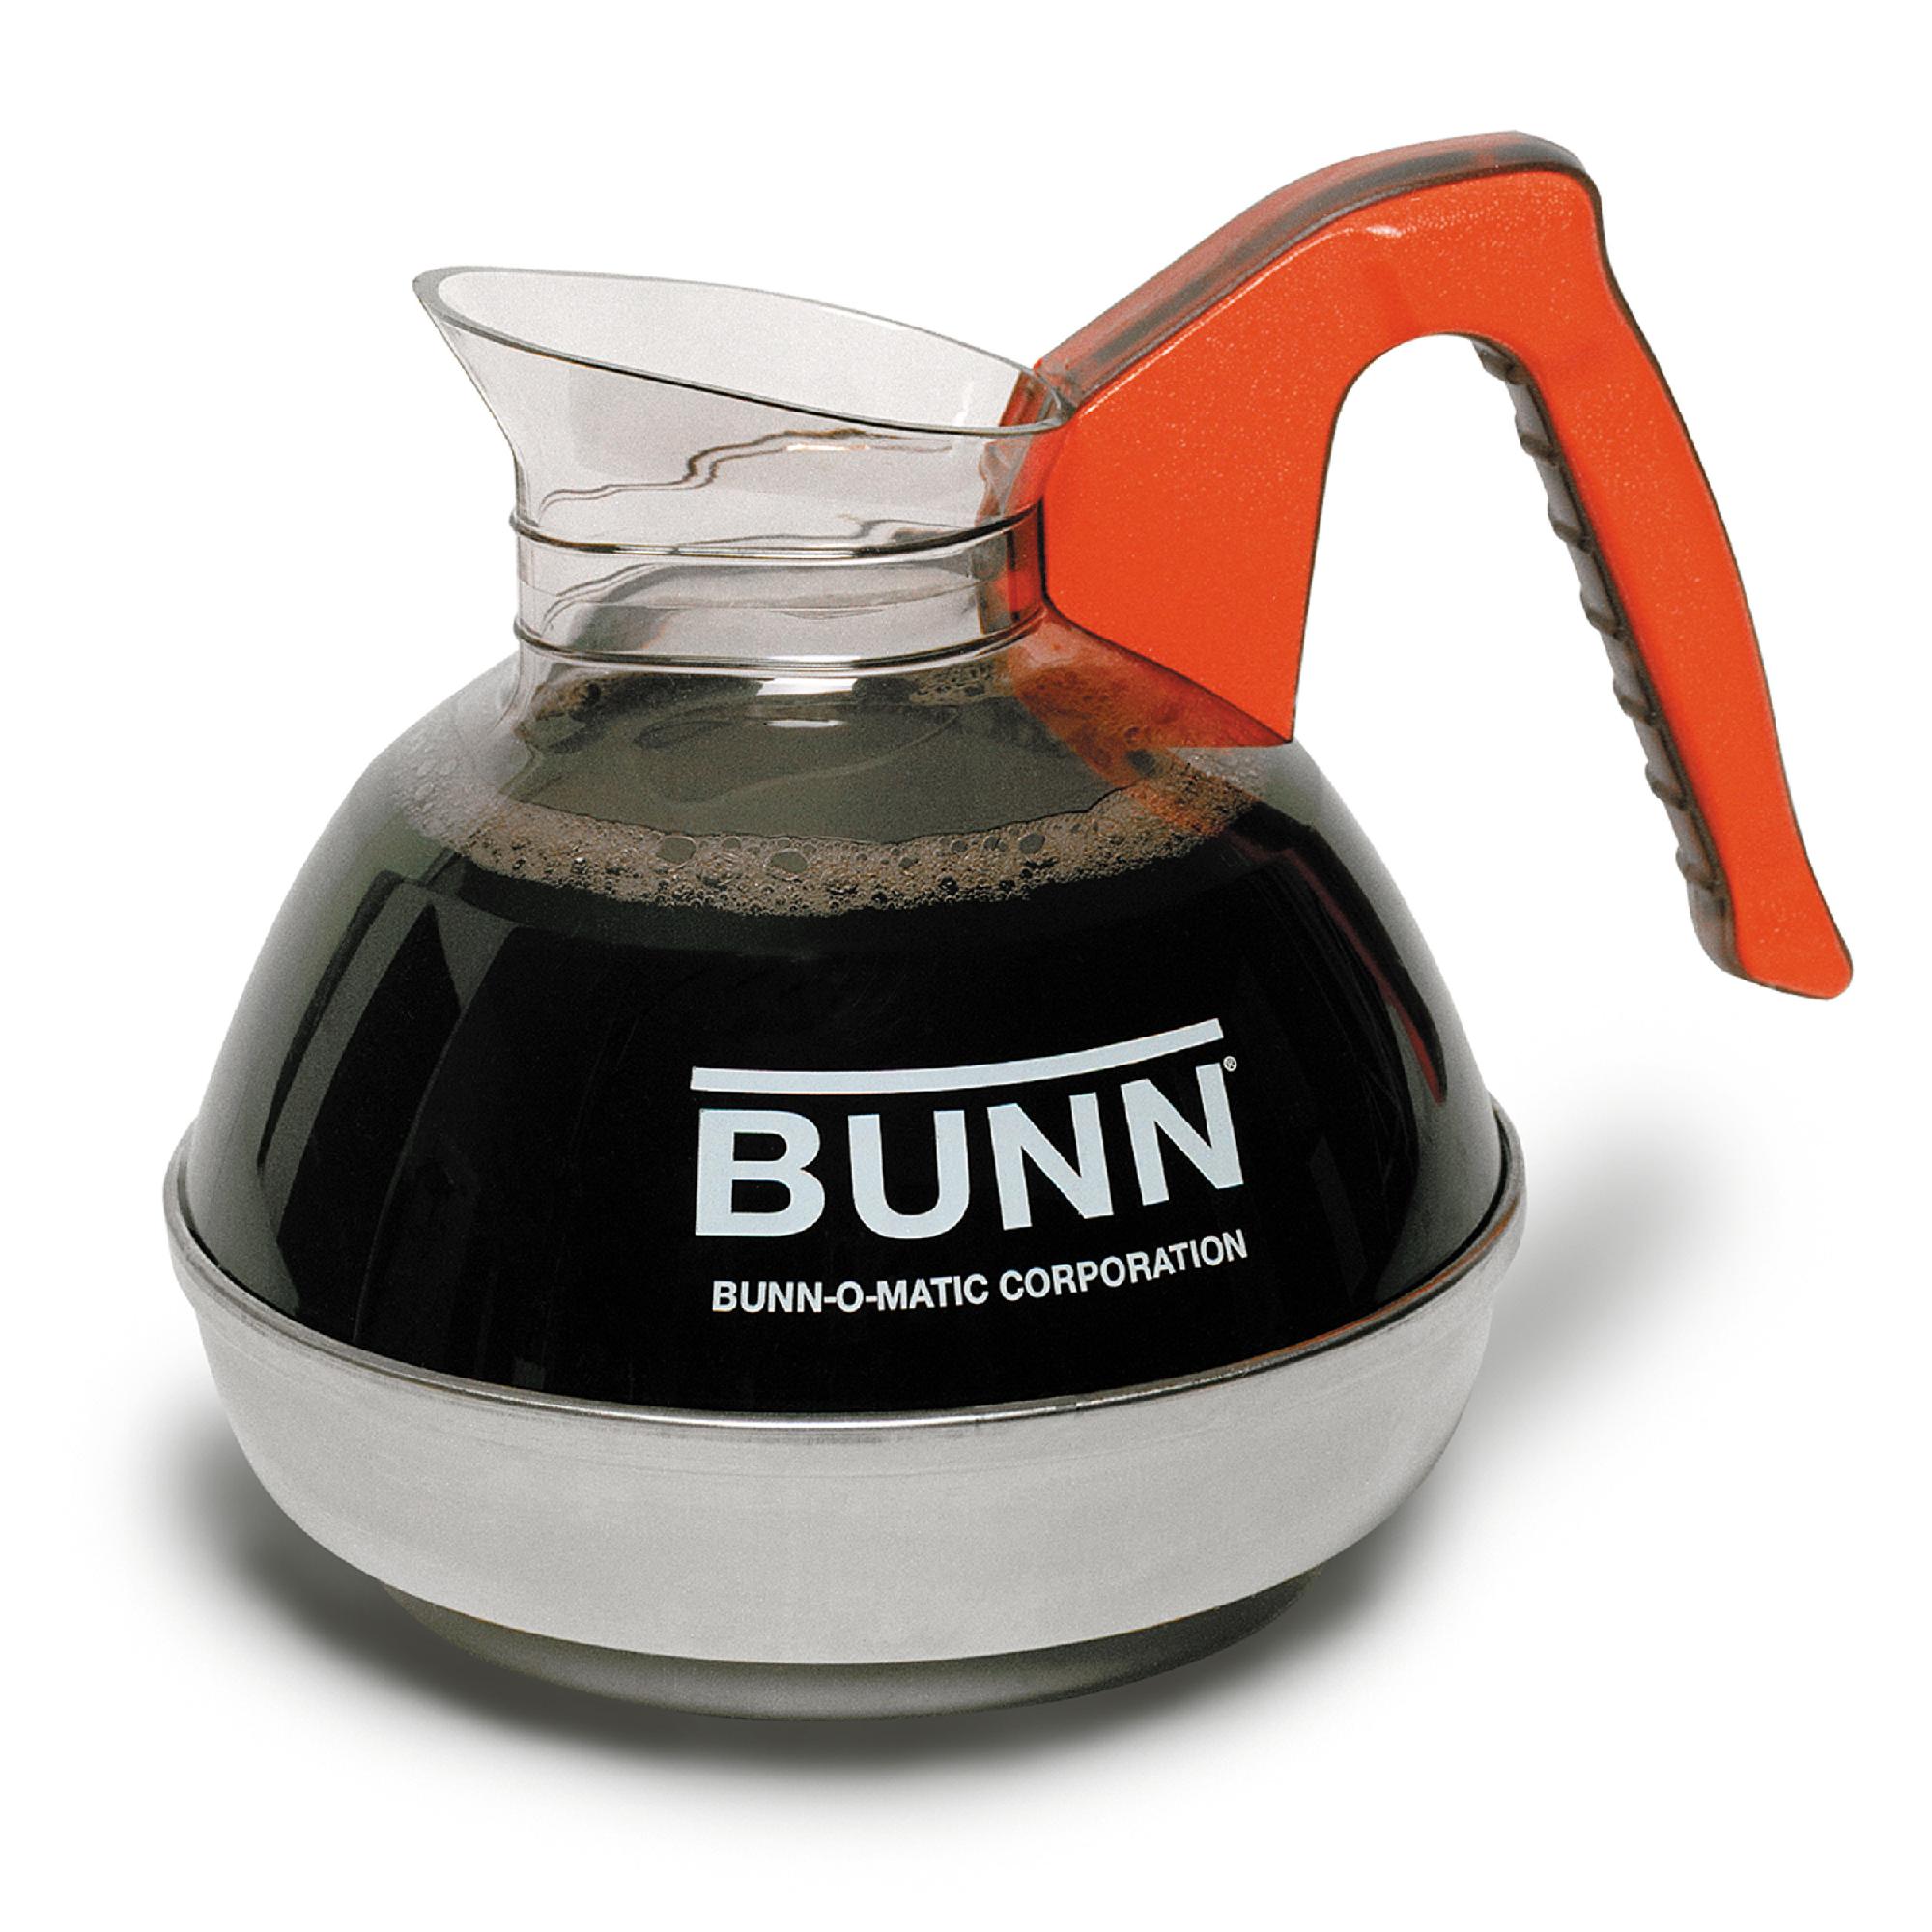 Bunn 6101.0101  Easy Pour Commercial 12-Cup Decaf Coffee Decanter, Orange